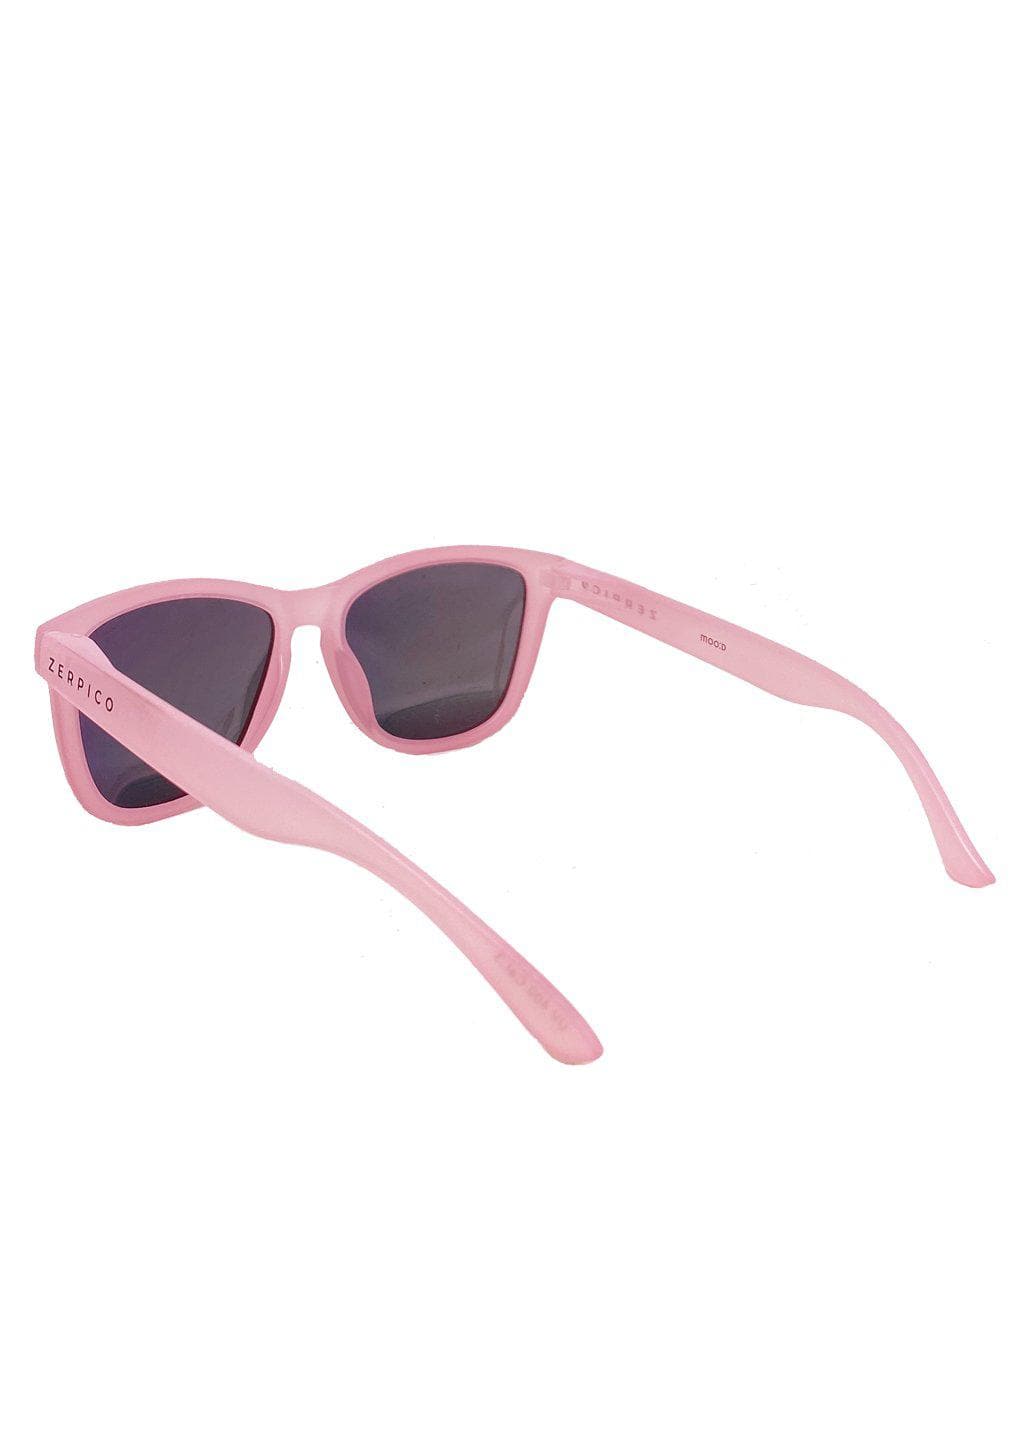 Our Mood V2 is an improved version of our last wayfarers. Plastic body for great quality and durabilty. This is Flamingo with a pink transparent frame and pink mirror lenses. Studio shoot from the back.